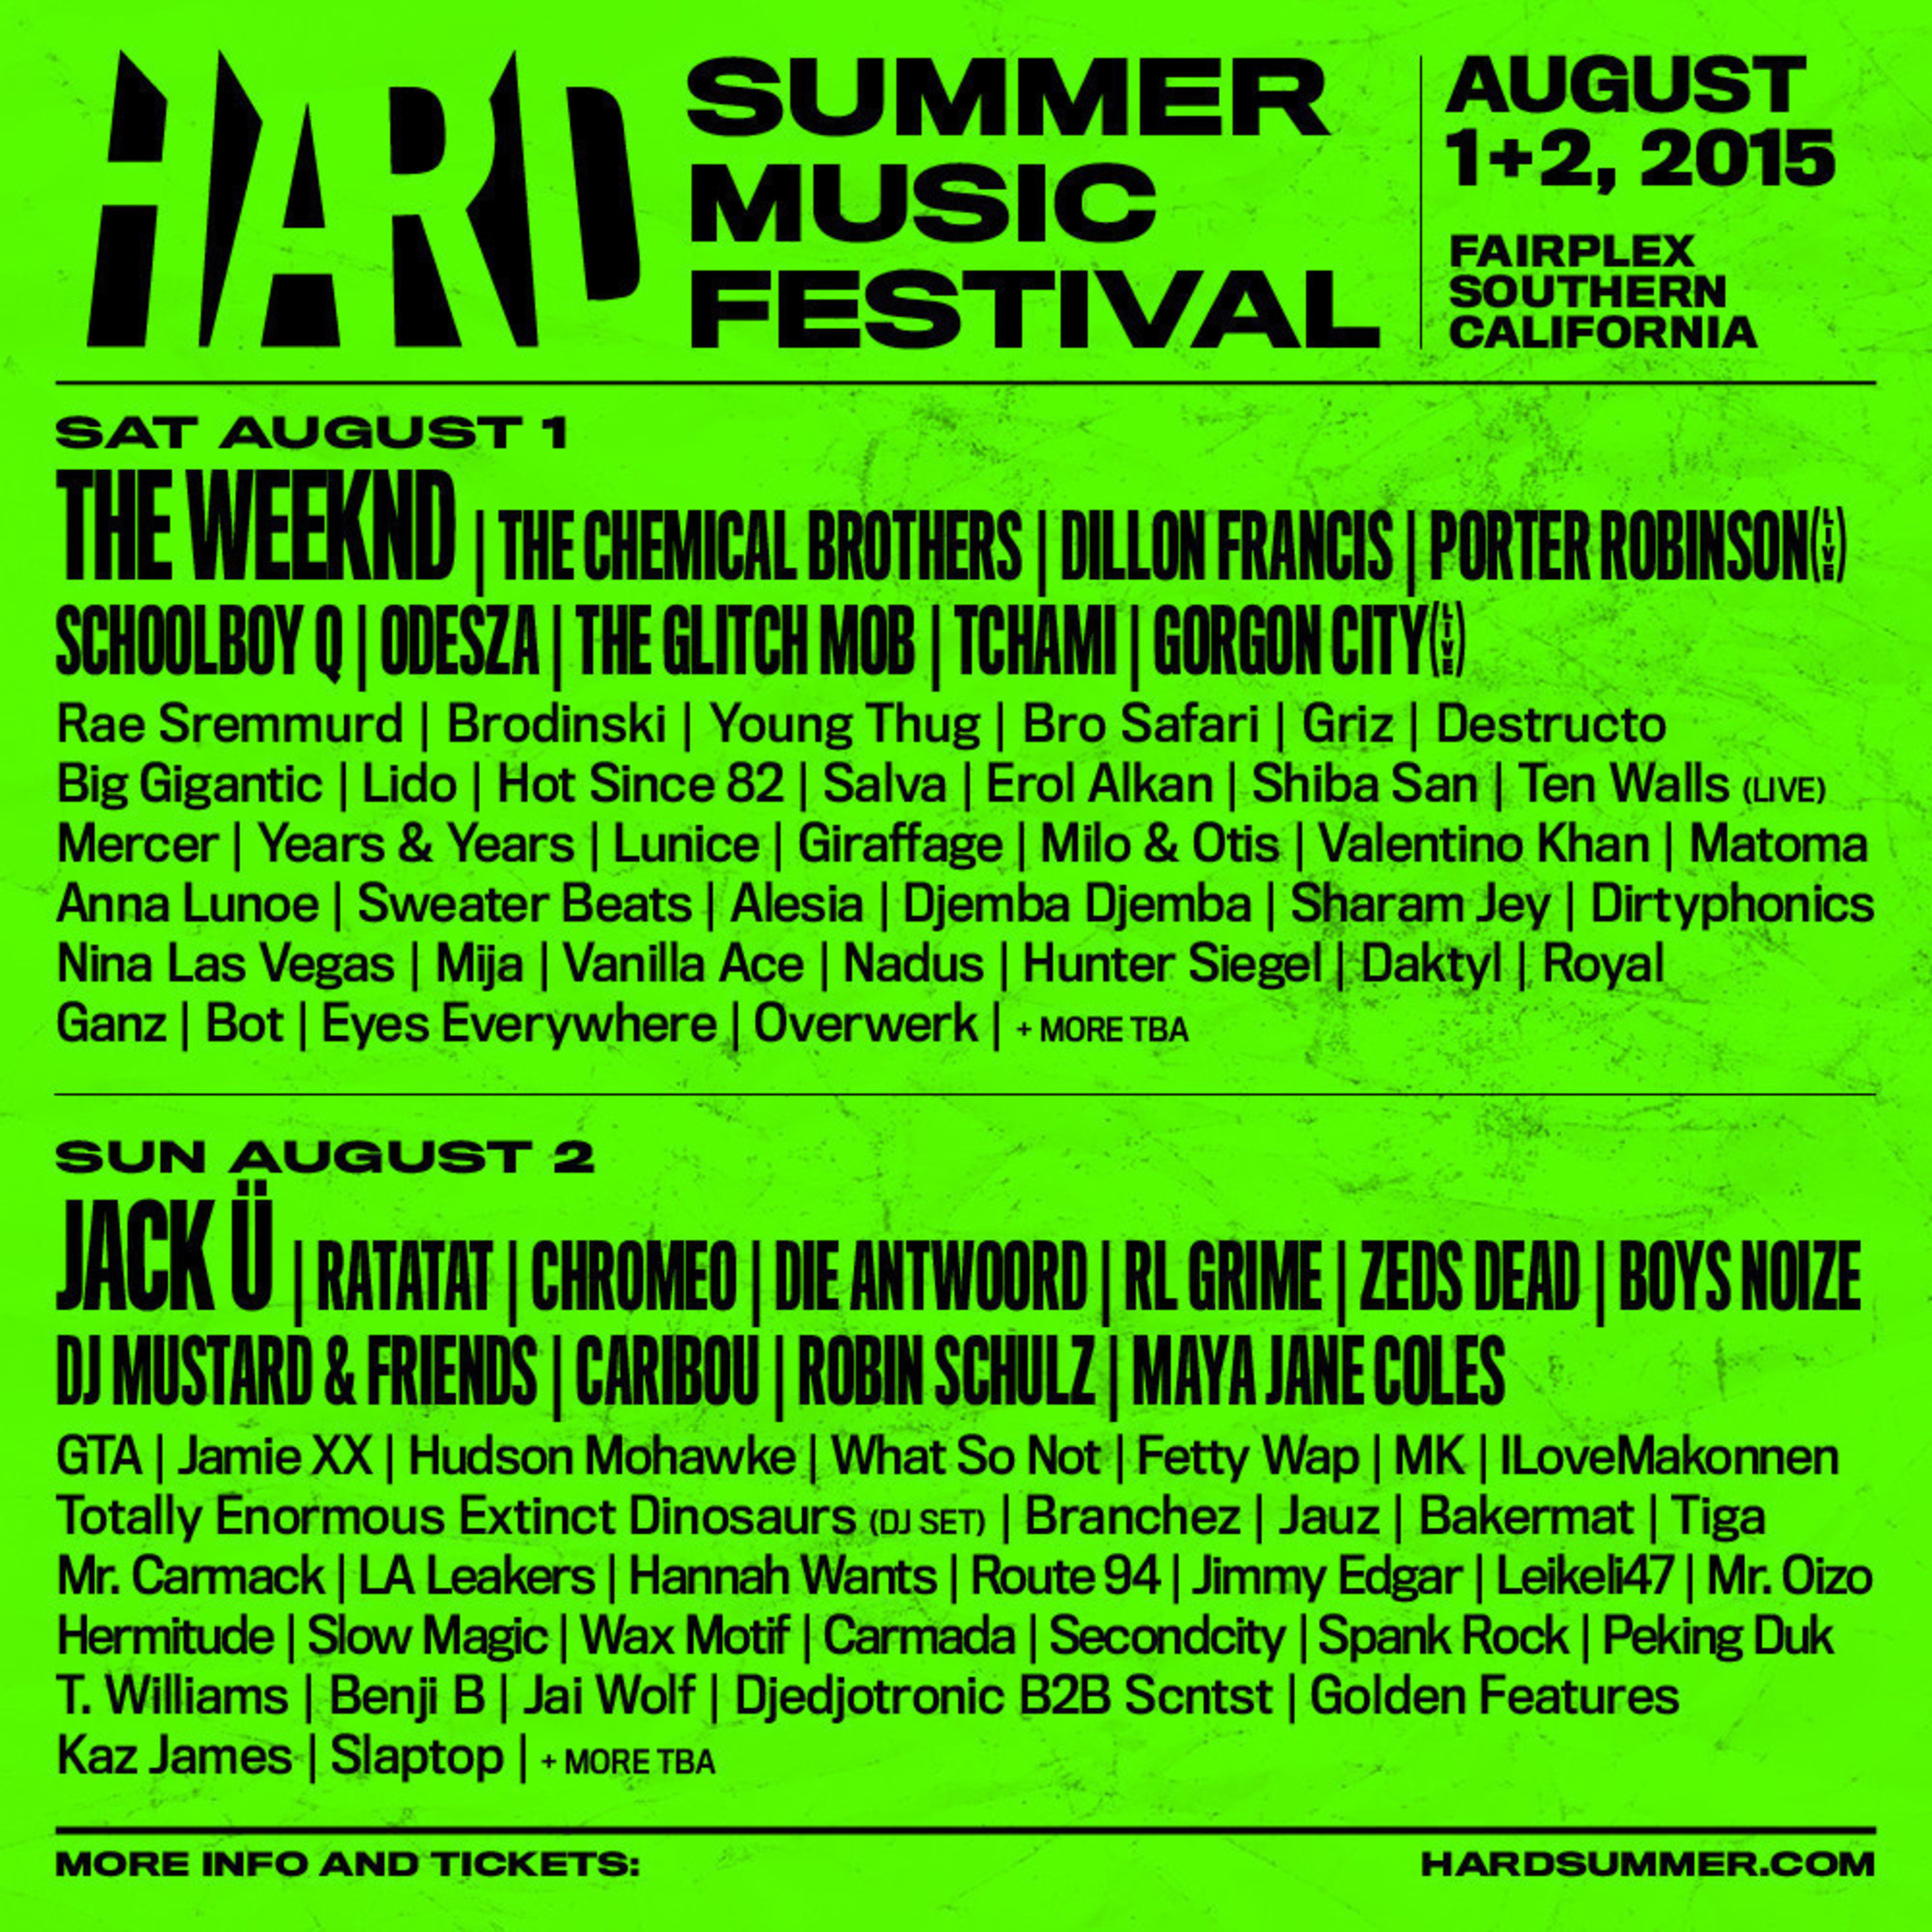 8th ANNUAL HARD SUMMER MUSIC FESTIVAL REVEALS LINE-UP